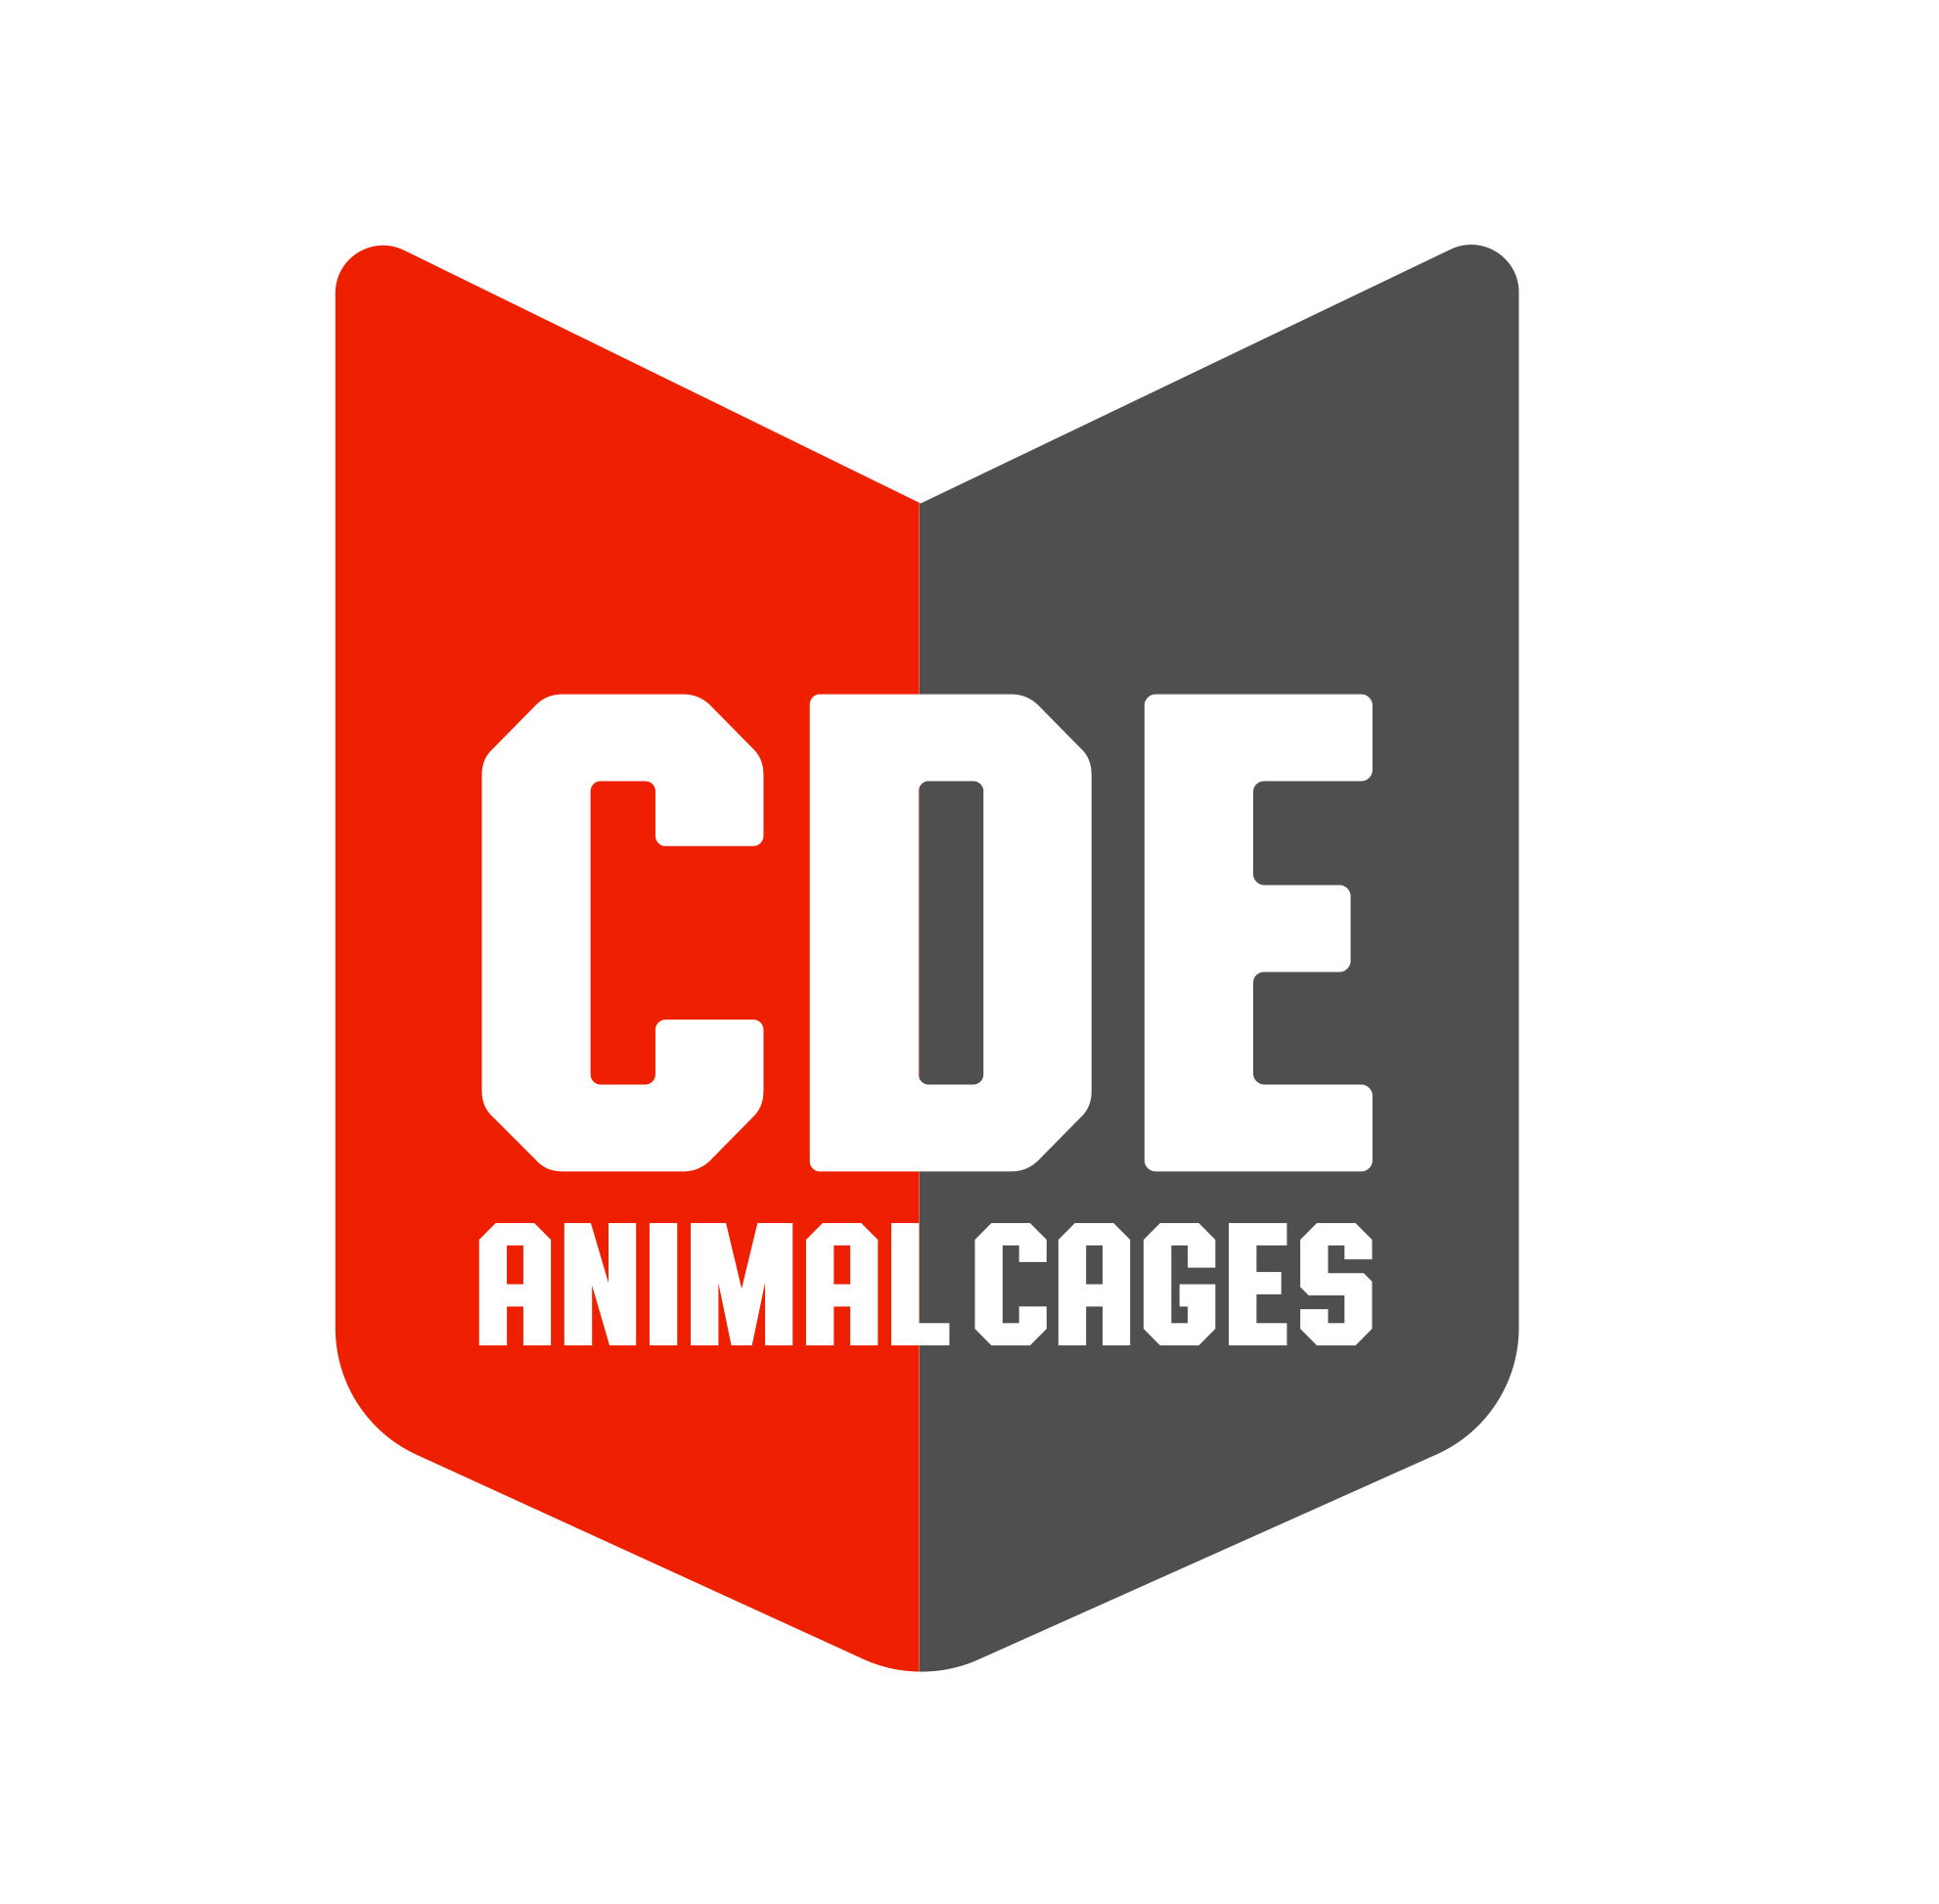 CDE animal cages